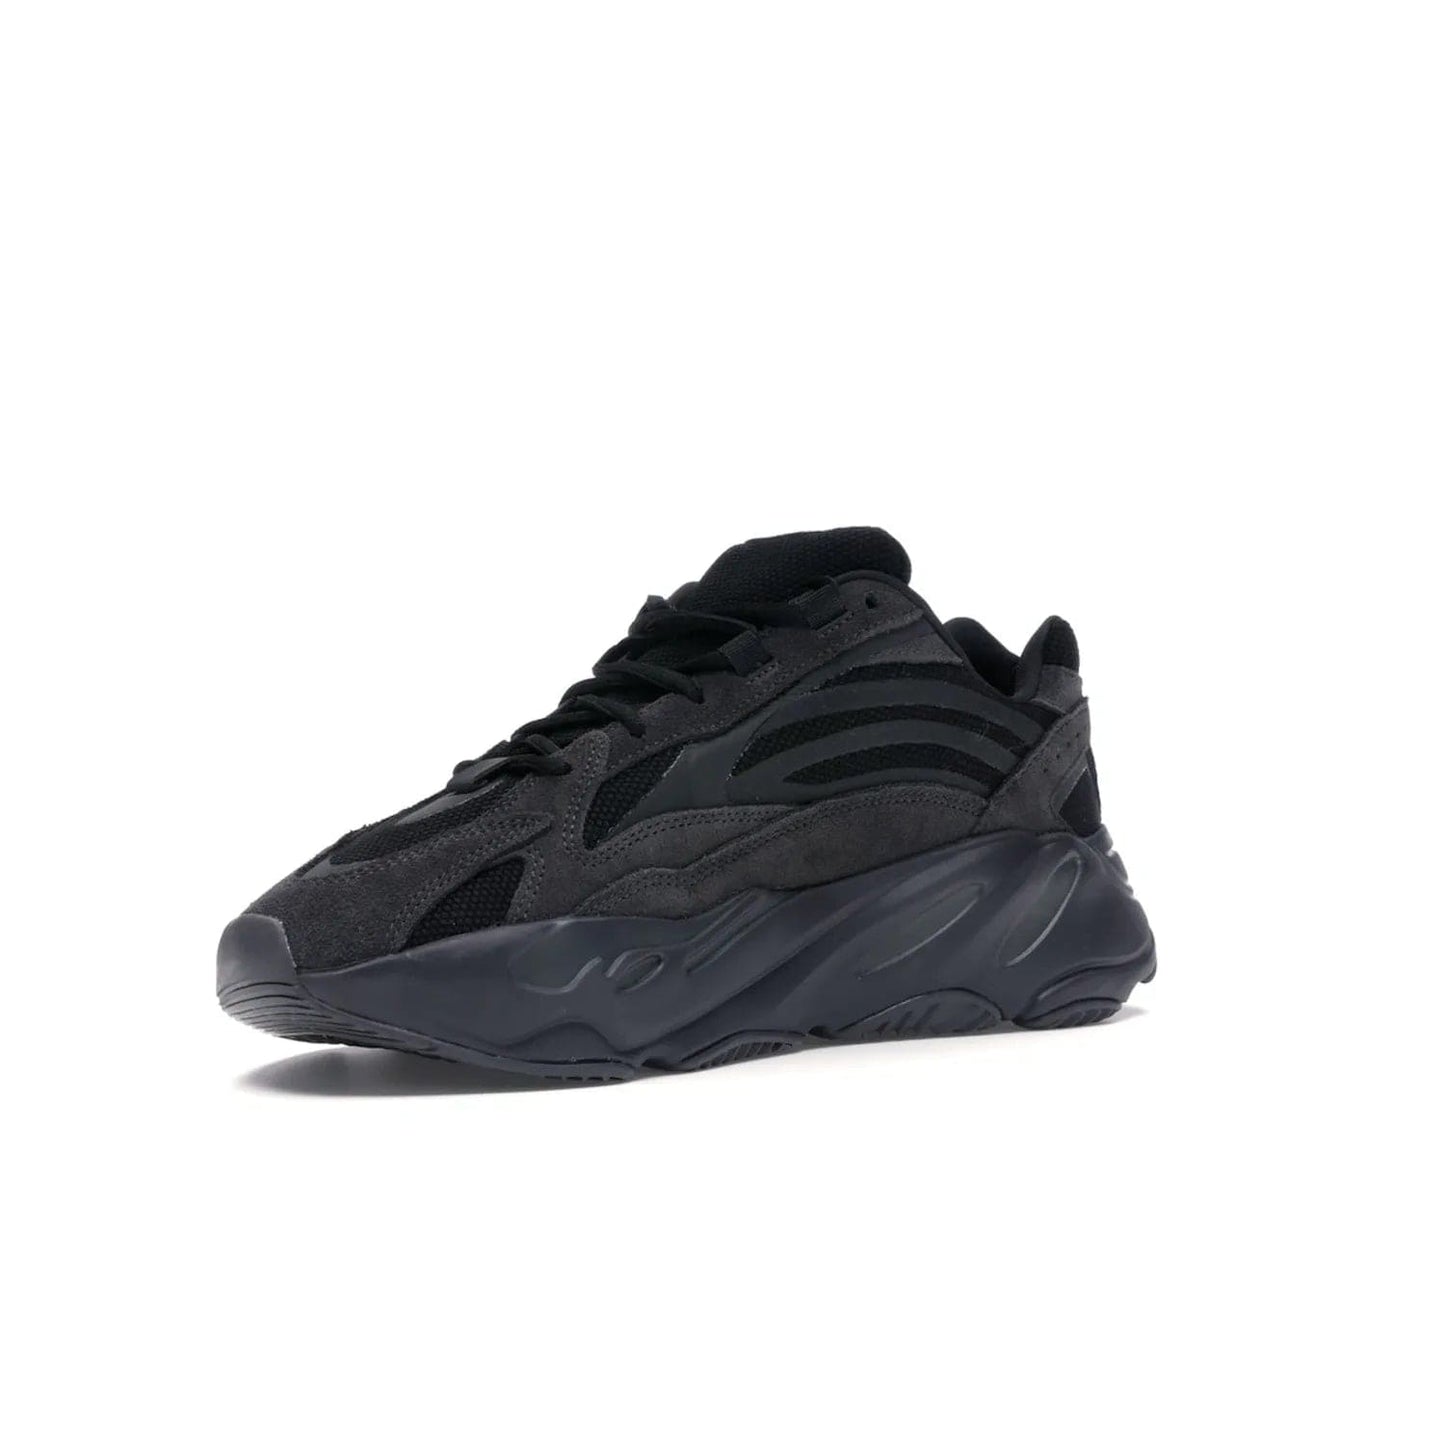 adidas Yeezy Boost 700 V2 Vanta - Image 15 - Only at www.BallersClubKickz.com - Introducing the adidas Yeezy Boost 700 V2 Vanta - a sleek and stylish all-black design featuring a combination of mesh, leather, and suede construction with signature Boost cushioning in the sole. The ultimate in comfort and support.